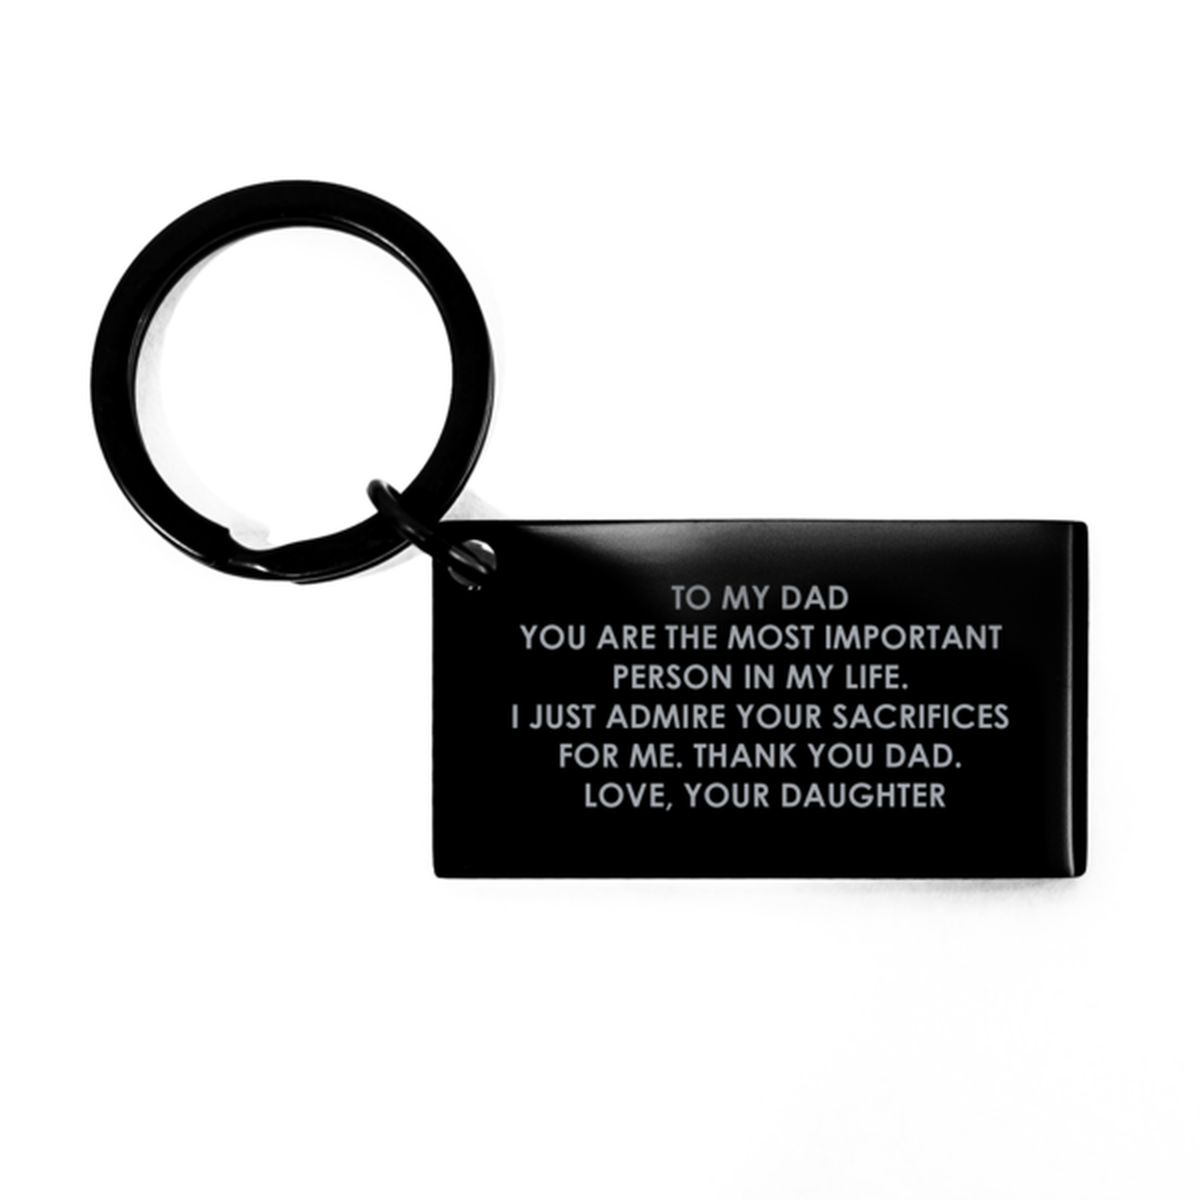 To My Dad Black Keychain, You Are The Most Important Person, Fathers Day Gifts For Dad From Daughter, Birthday Gifts For Men